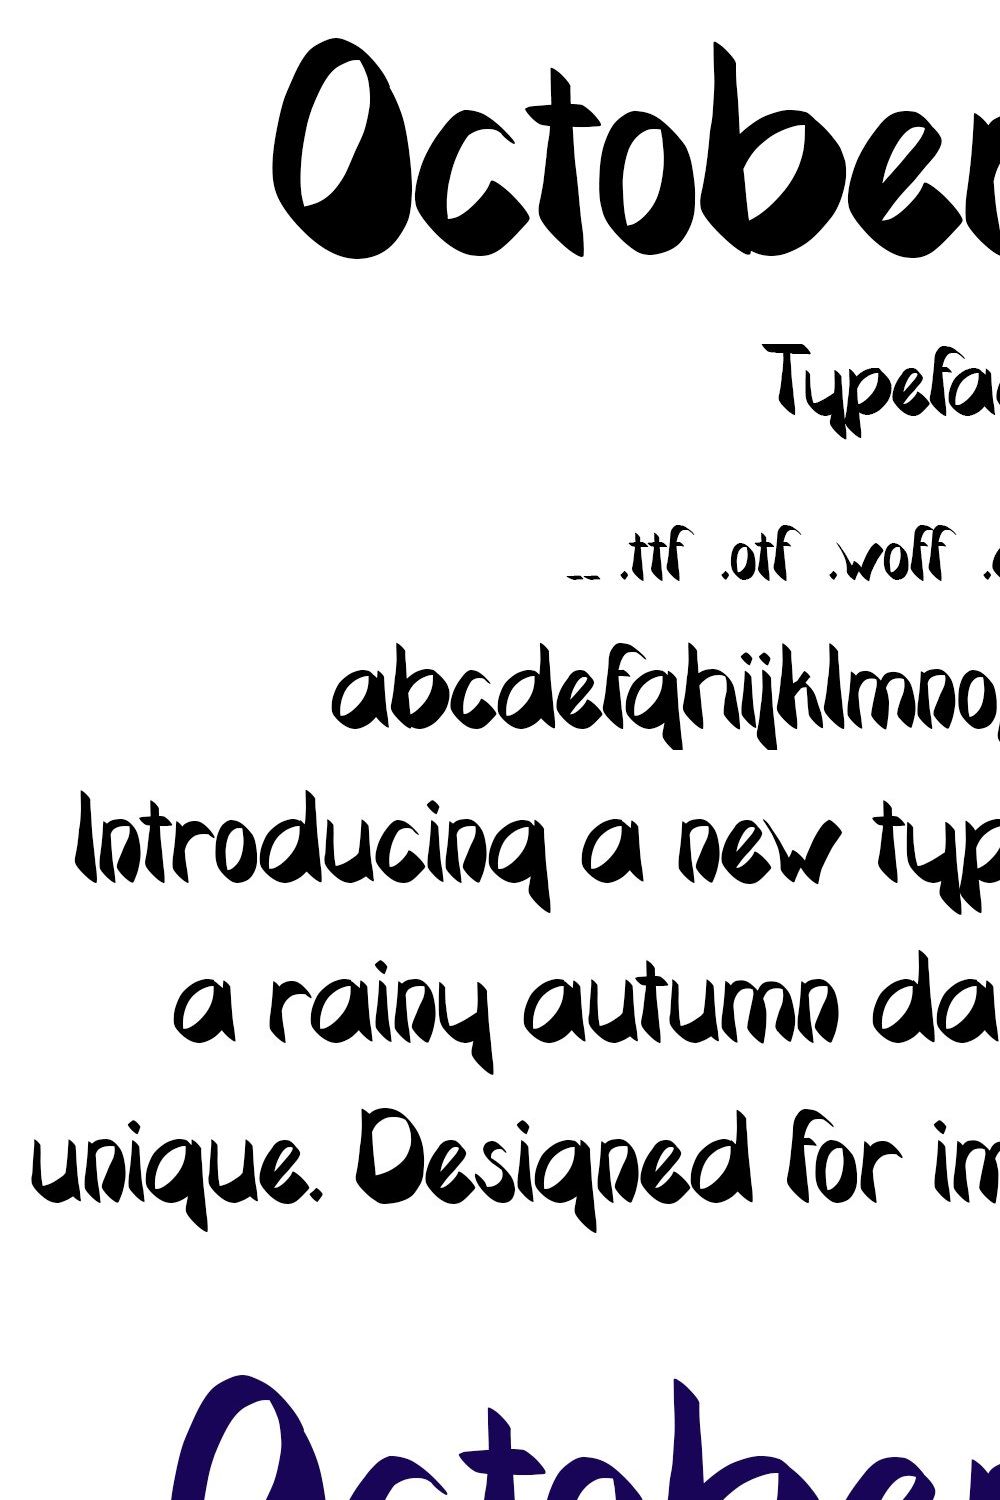 Font October Rain Earthy Autumn Bold pinterest preview image.